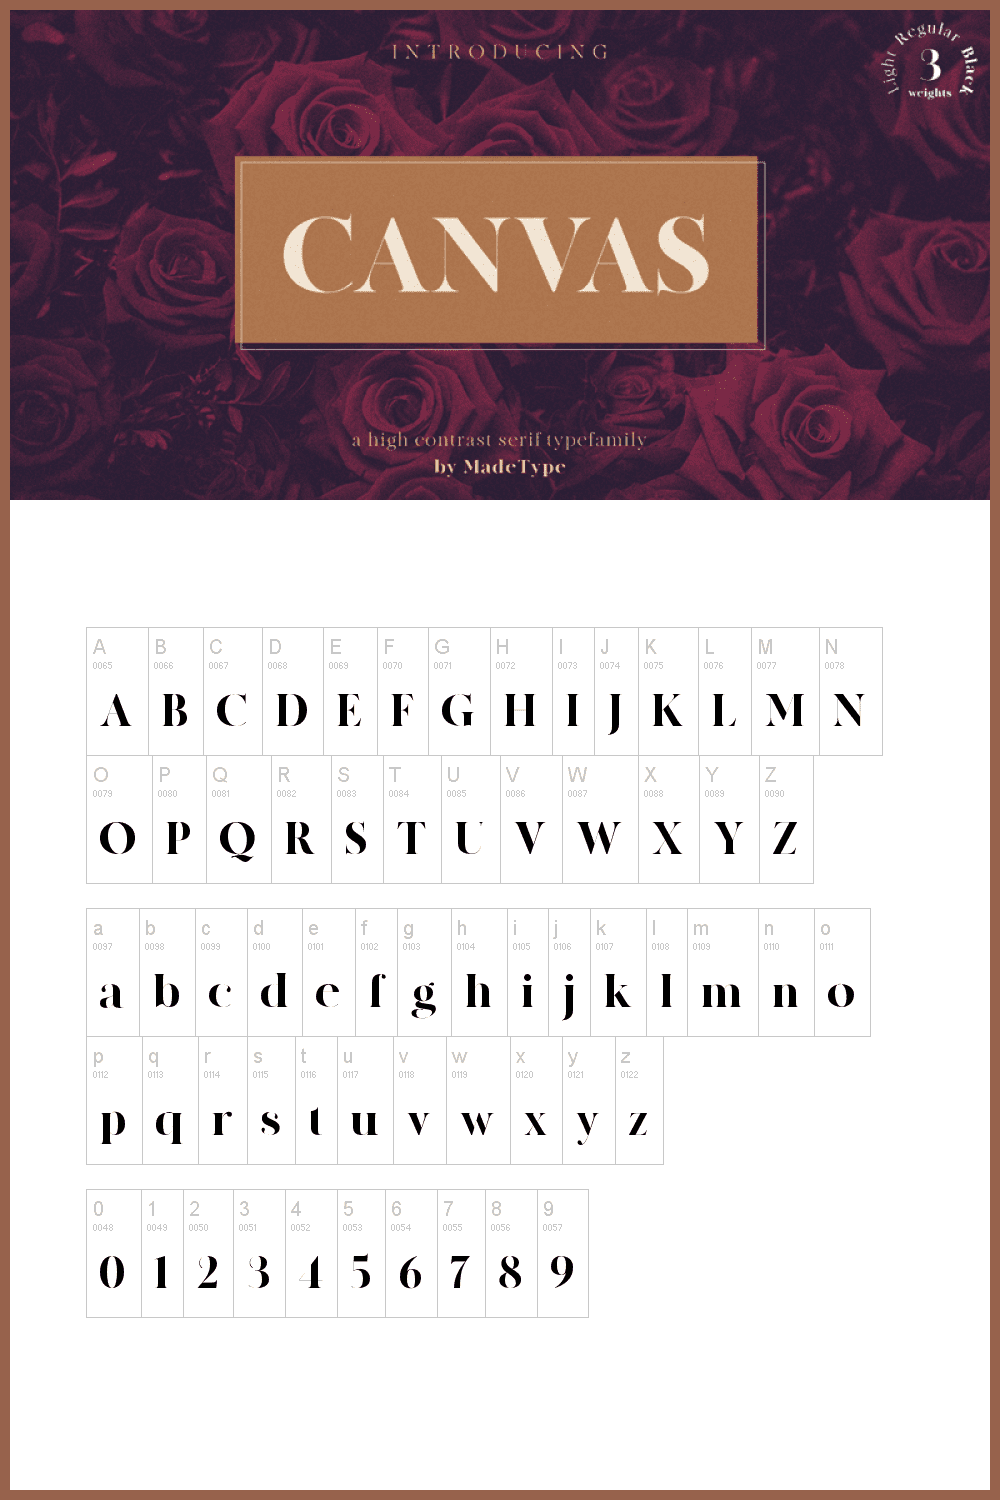 It is a modern typeface to describe the Cannes Film Festival.